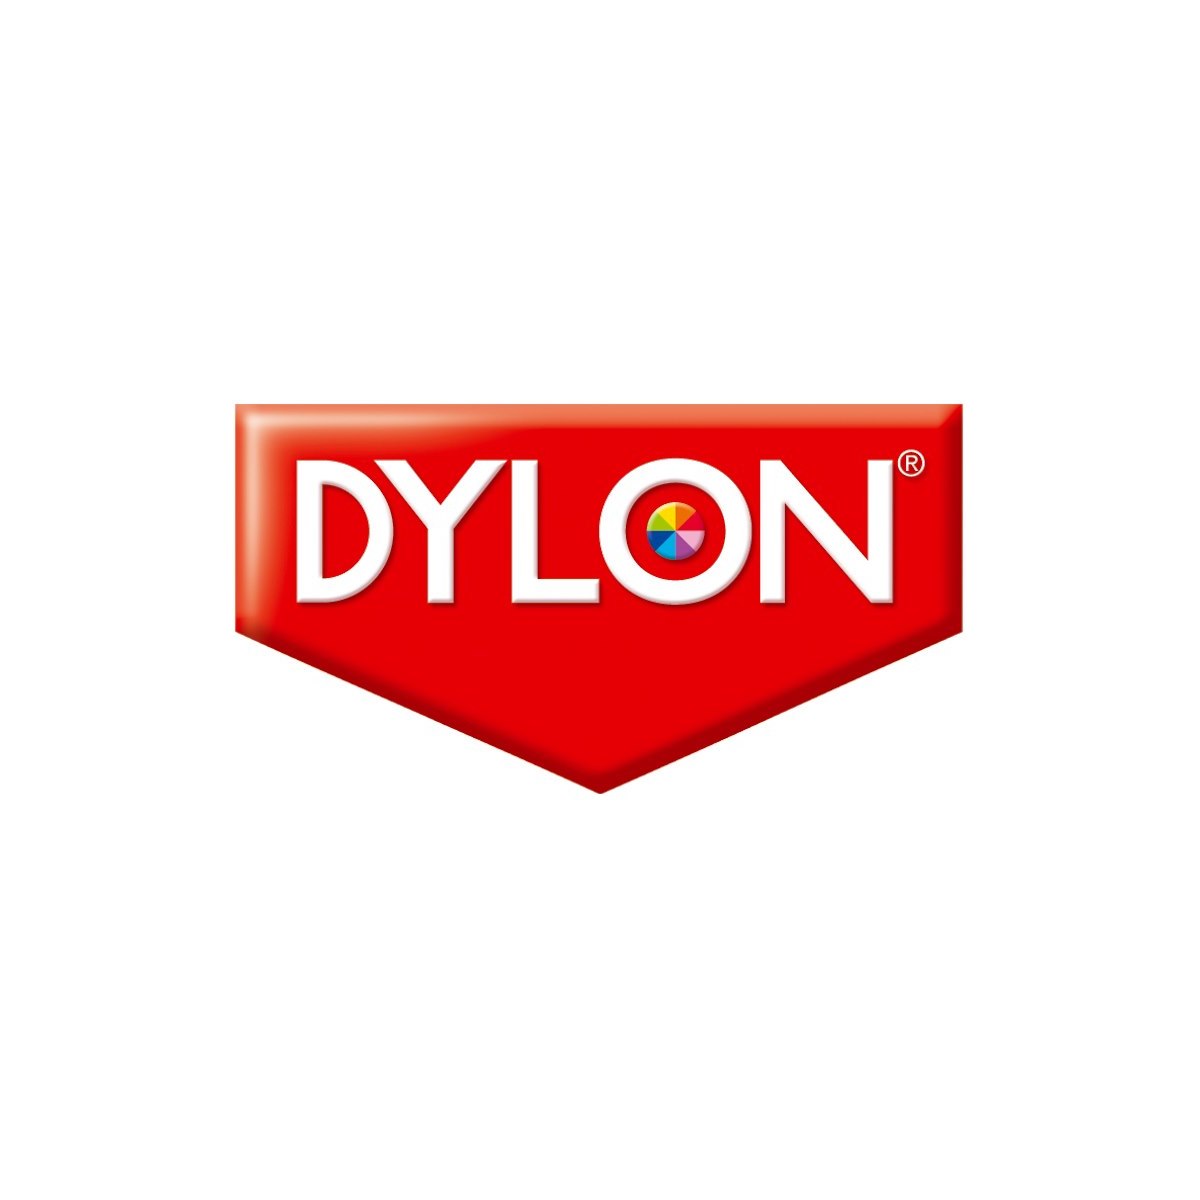 Where to Buy Dylon Products